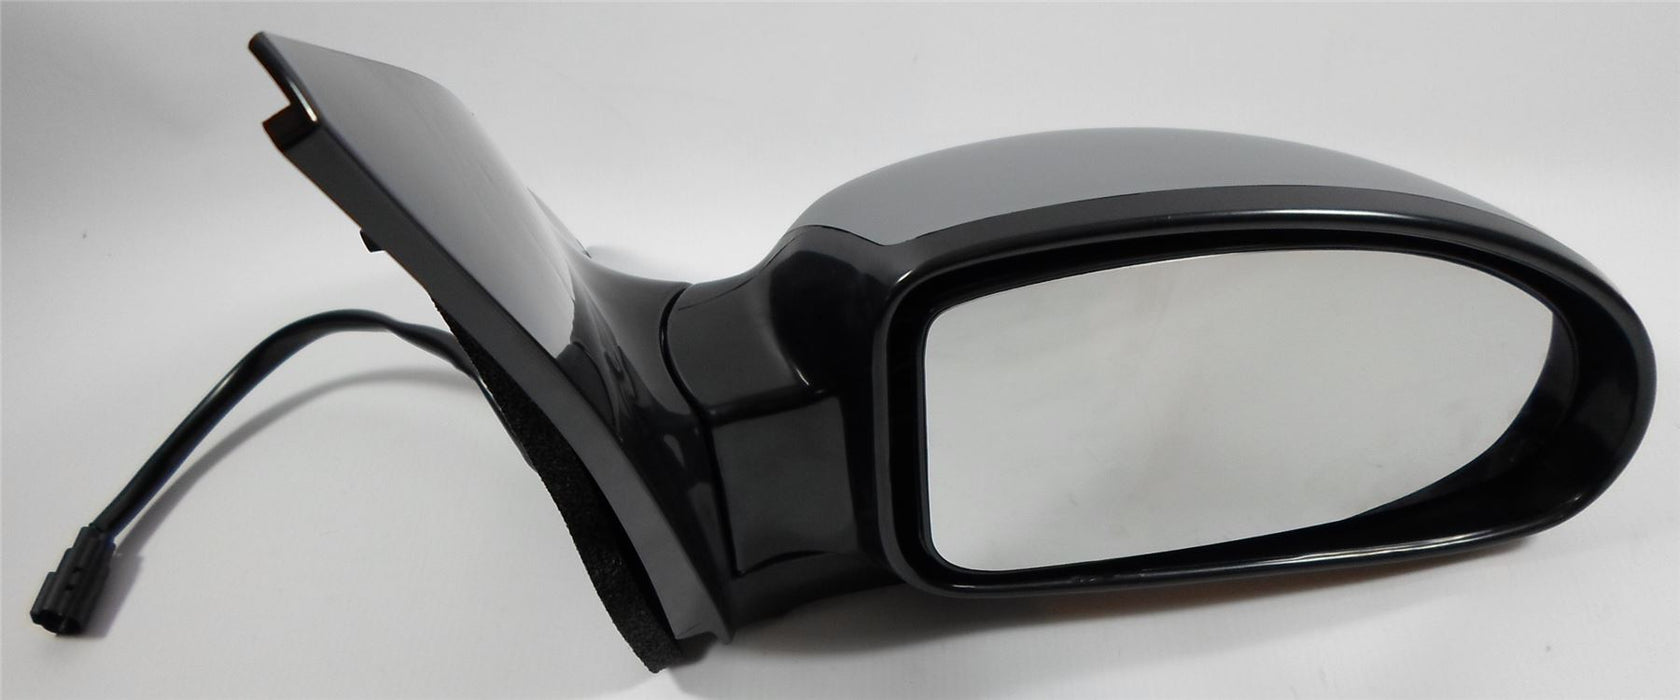 Ford Focus Mk.1 1998-4/2005 Electric Wing Mirror Heated Drivers Side O/S Painted Sprayed